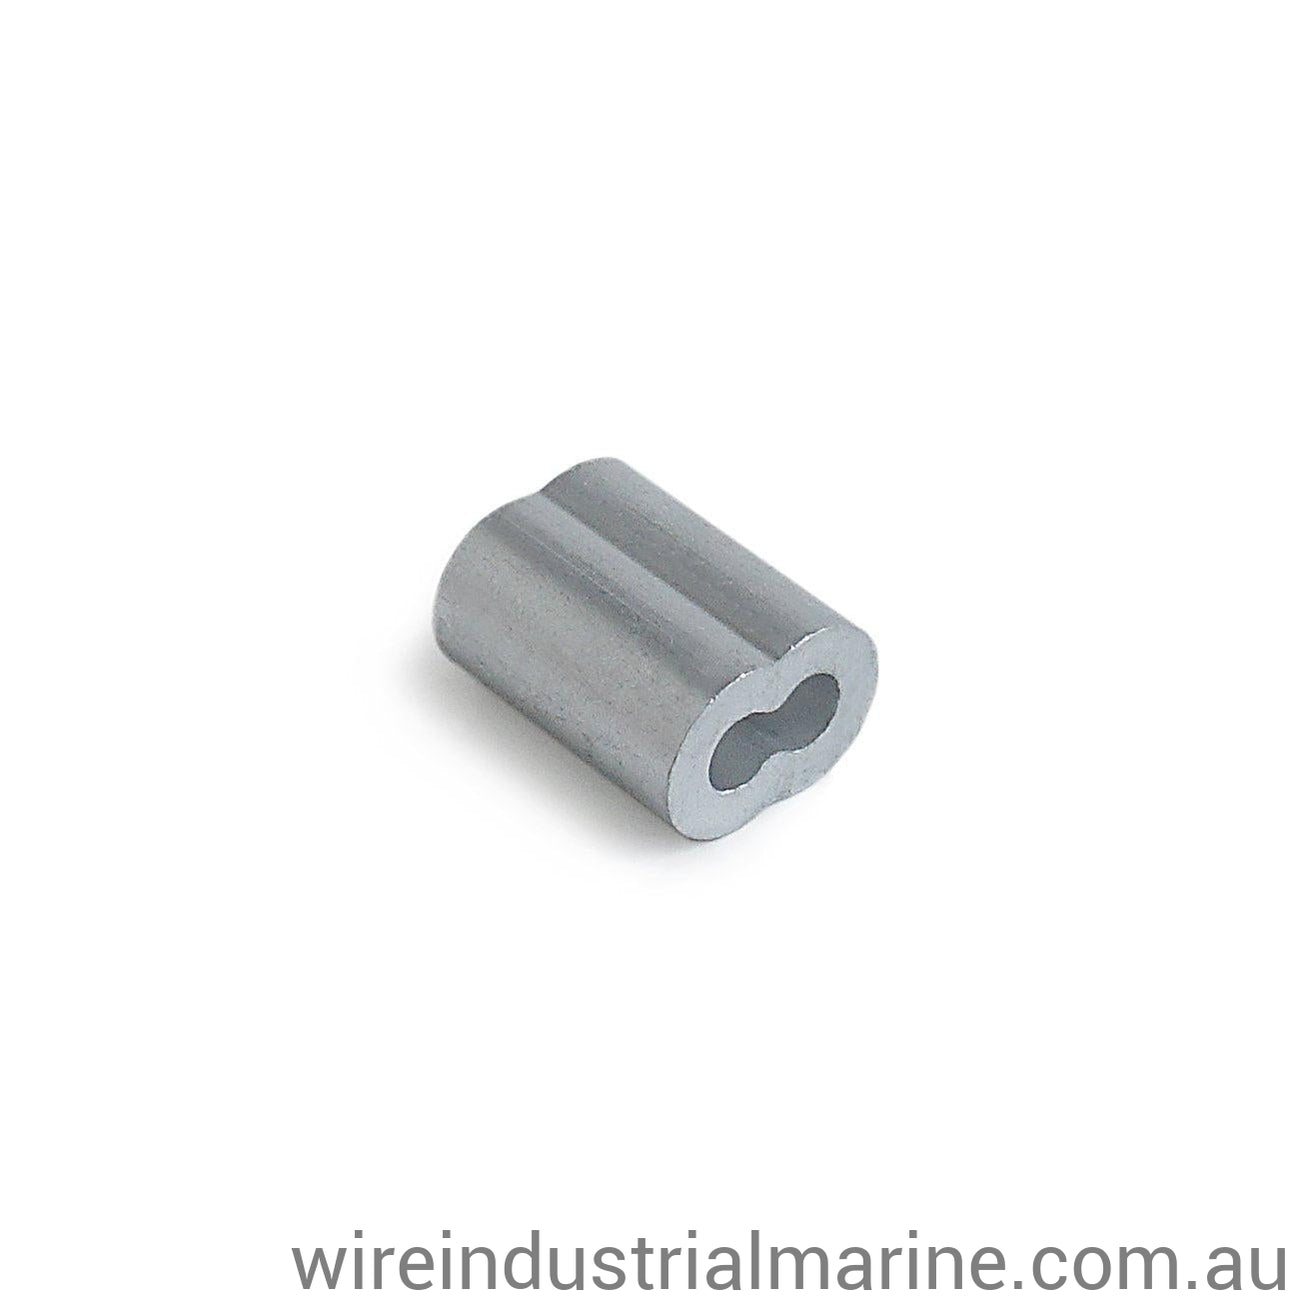 3mm Alloy swage for wire rope-AS-3.0-wireindustrialmarine